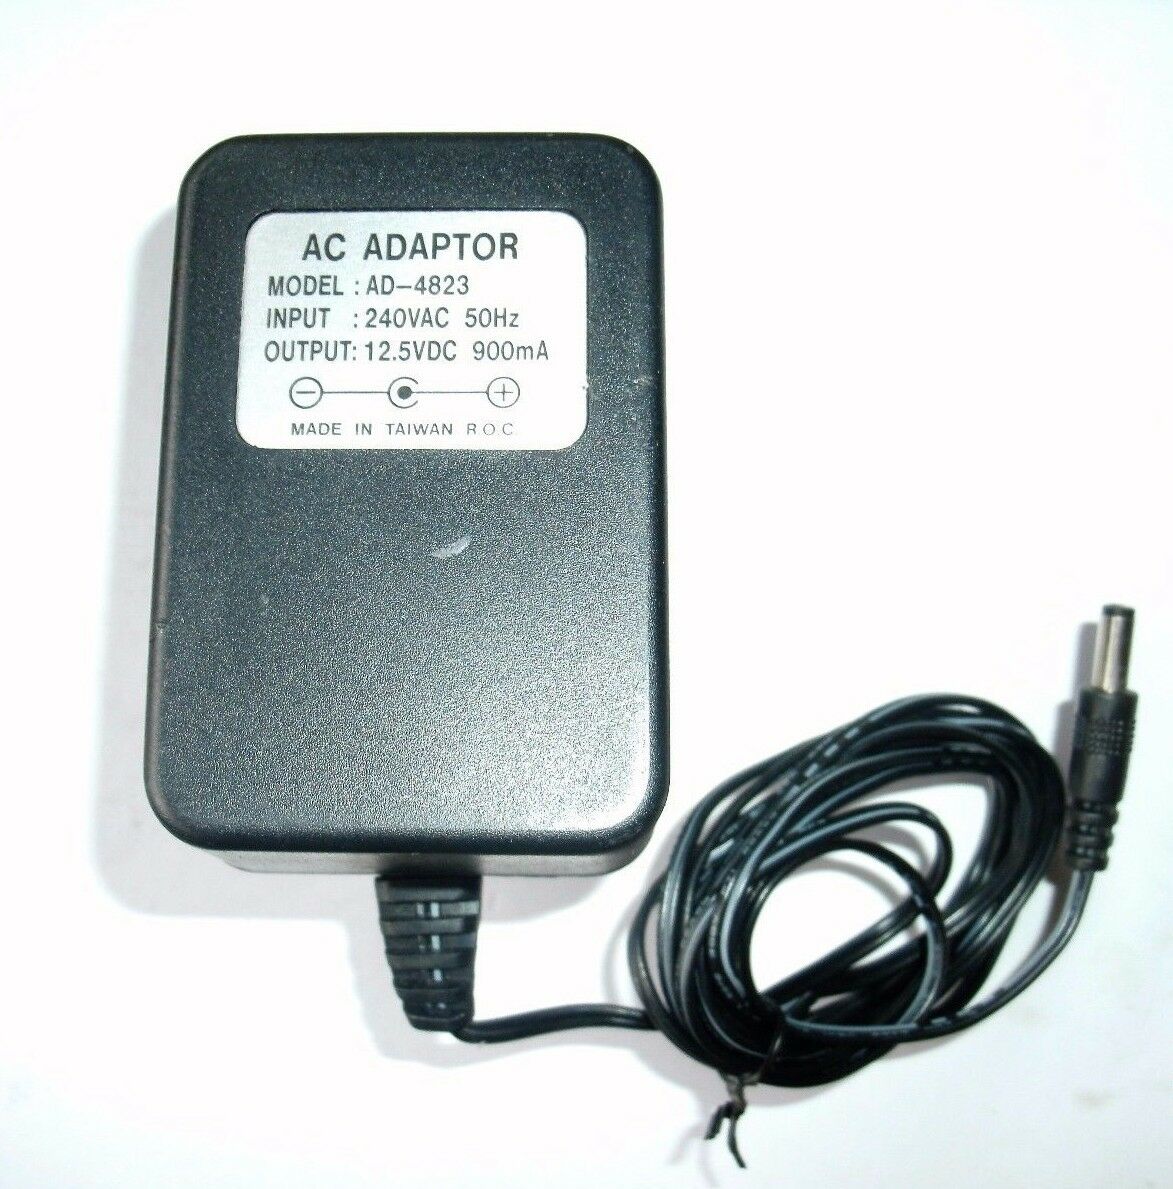 New DC12.5V 900mA AD-4823 Power Supply AC ADAPTER